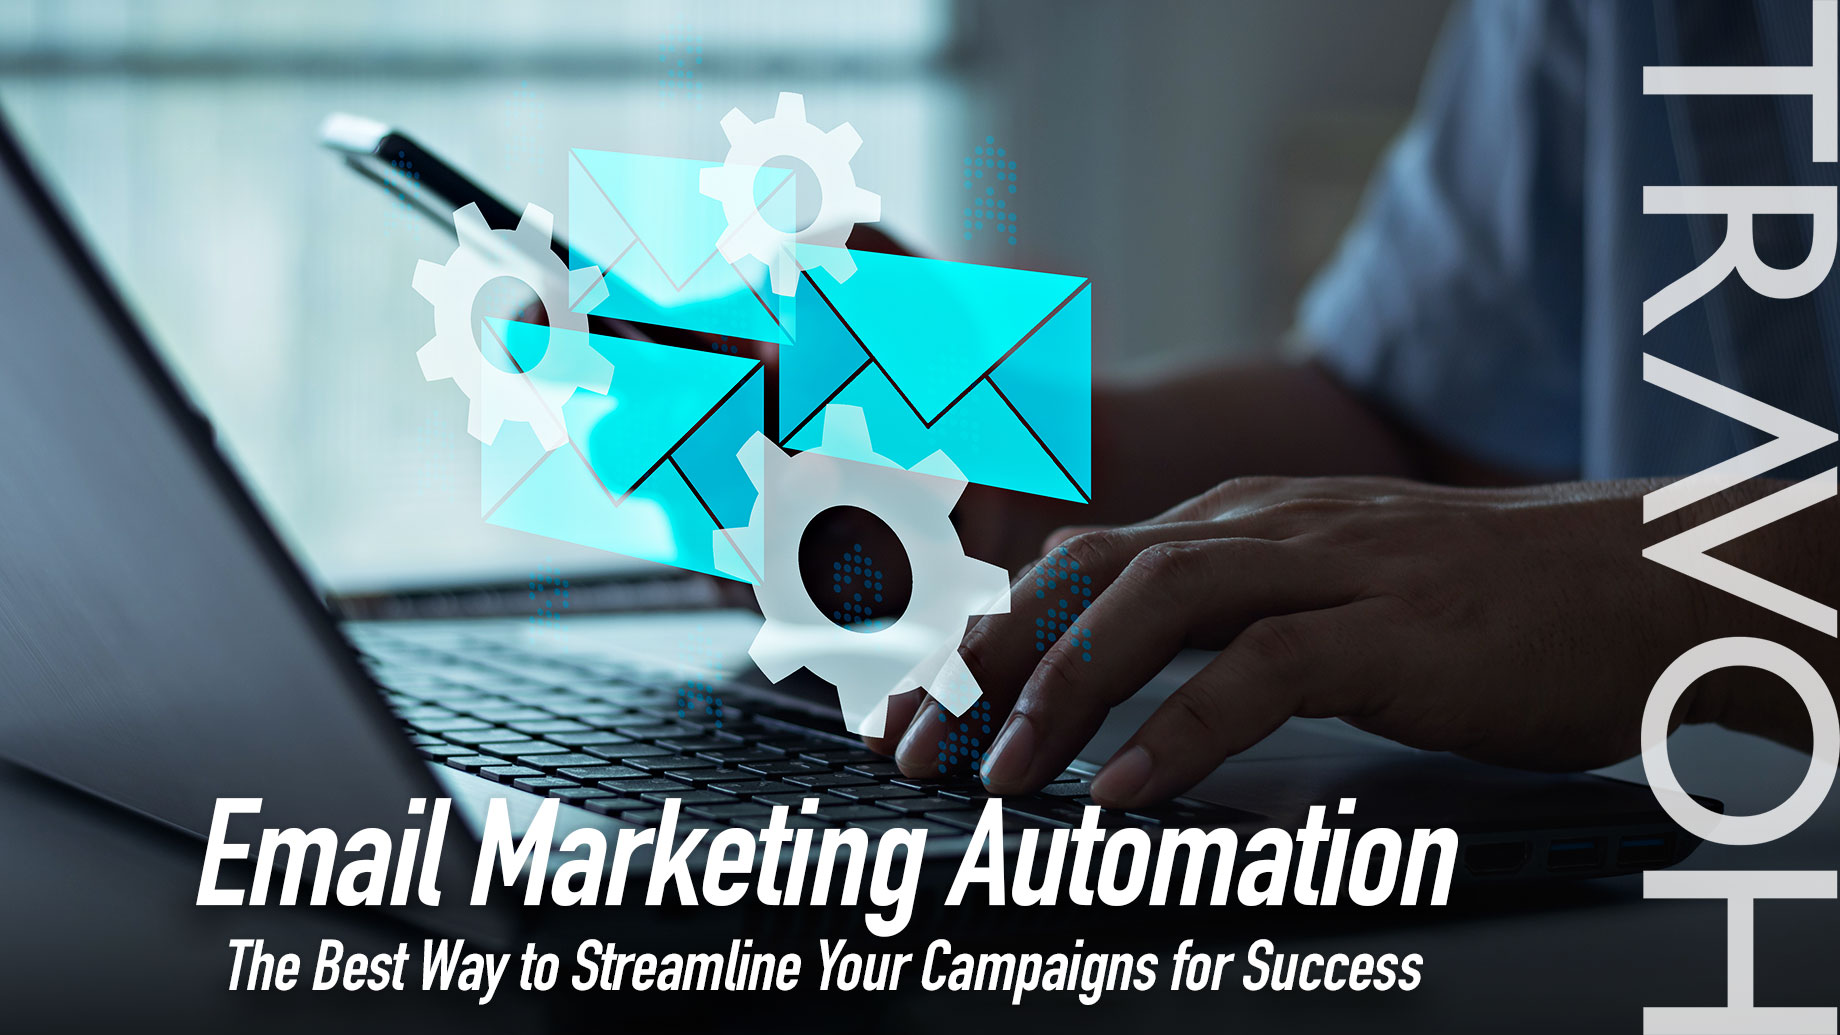 Email Marketing Automation The Best Way to Streamline Your Campaigns for Success